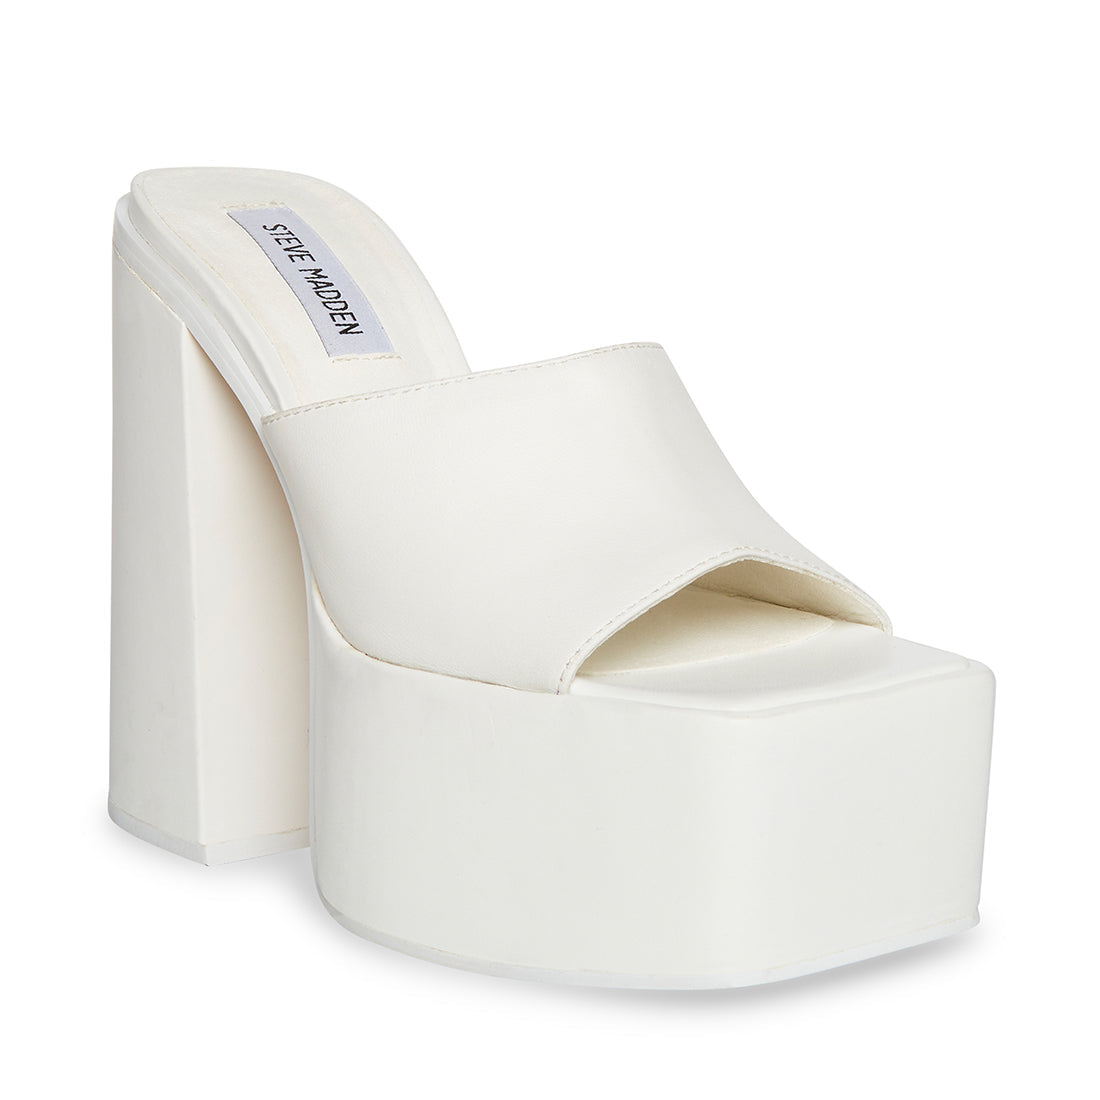 Trixie Sandal White Leather- Hover Image